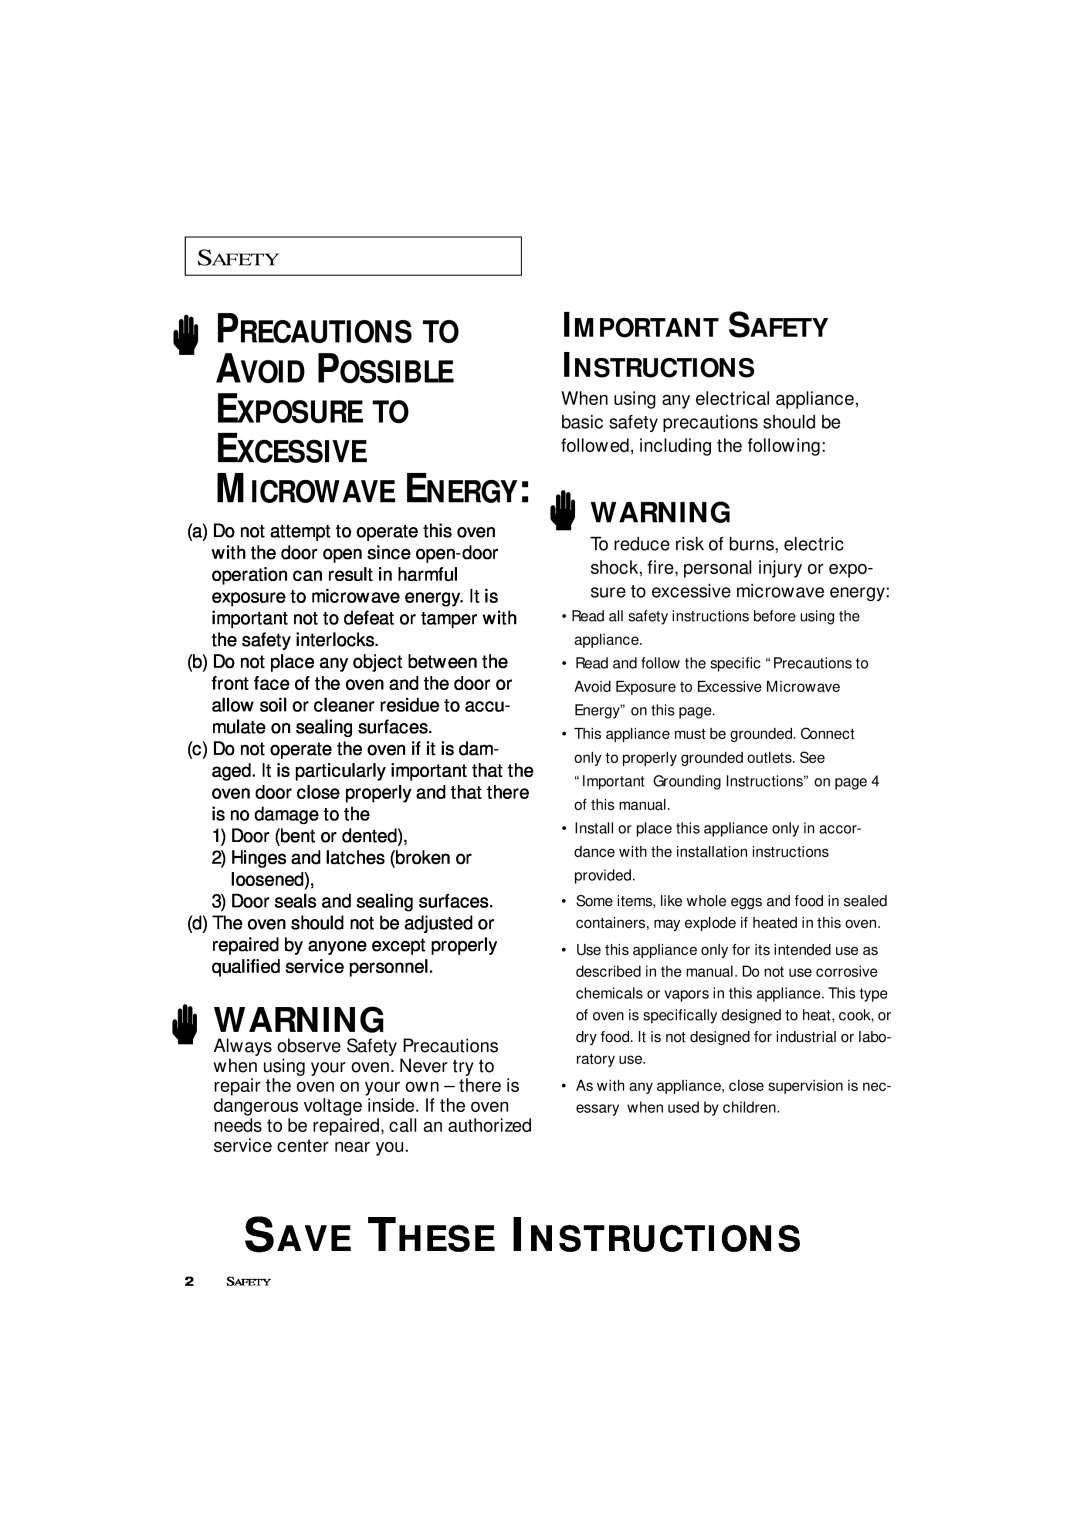 Samsung ME4096W, MW4390W Save These Instructions, Precautions To Avoid Possible Exposure To, Excessive, Microwave Energy 